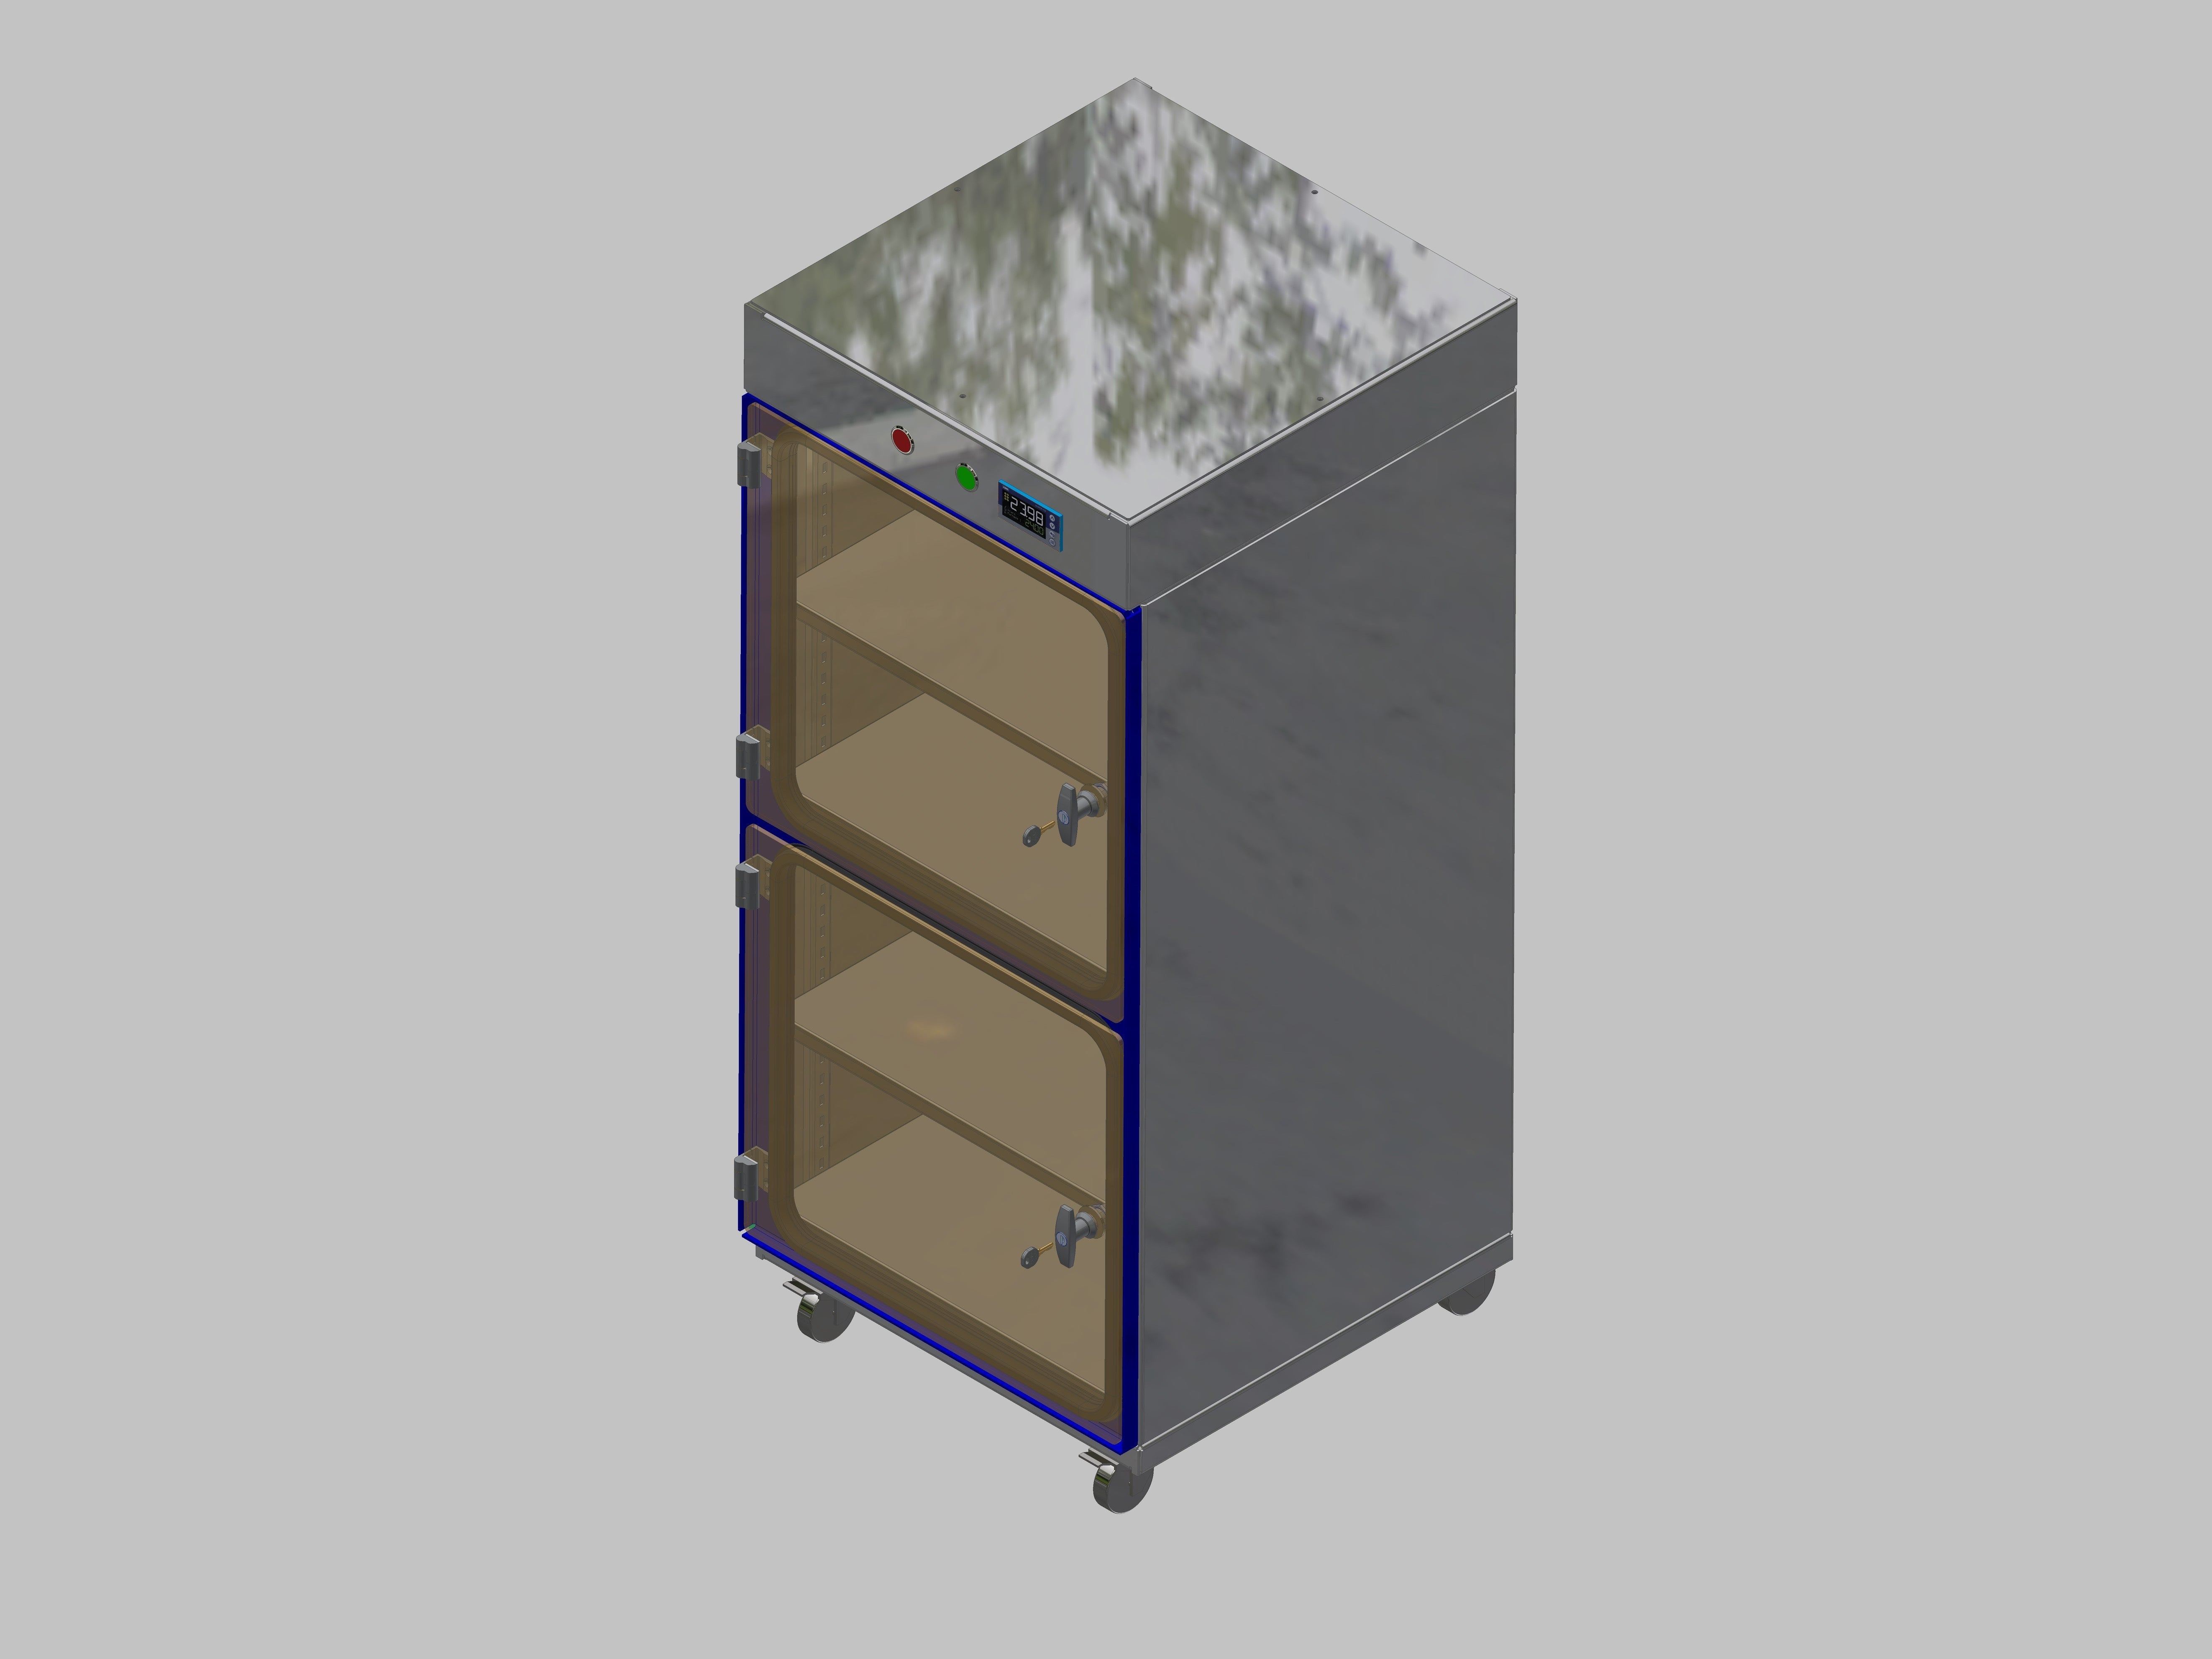 Dry storage cabinet-ITN-600-1 with 2 shelves per compartment and base design with wheels